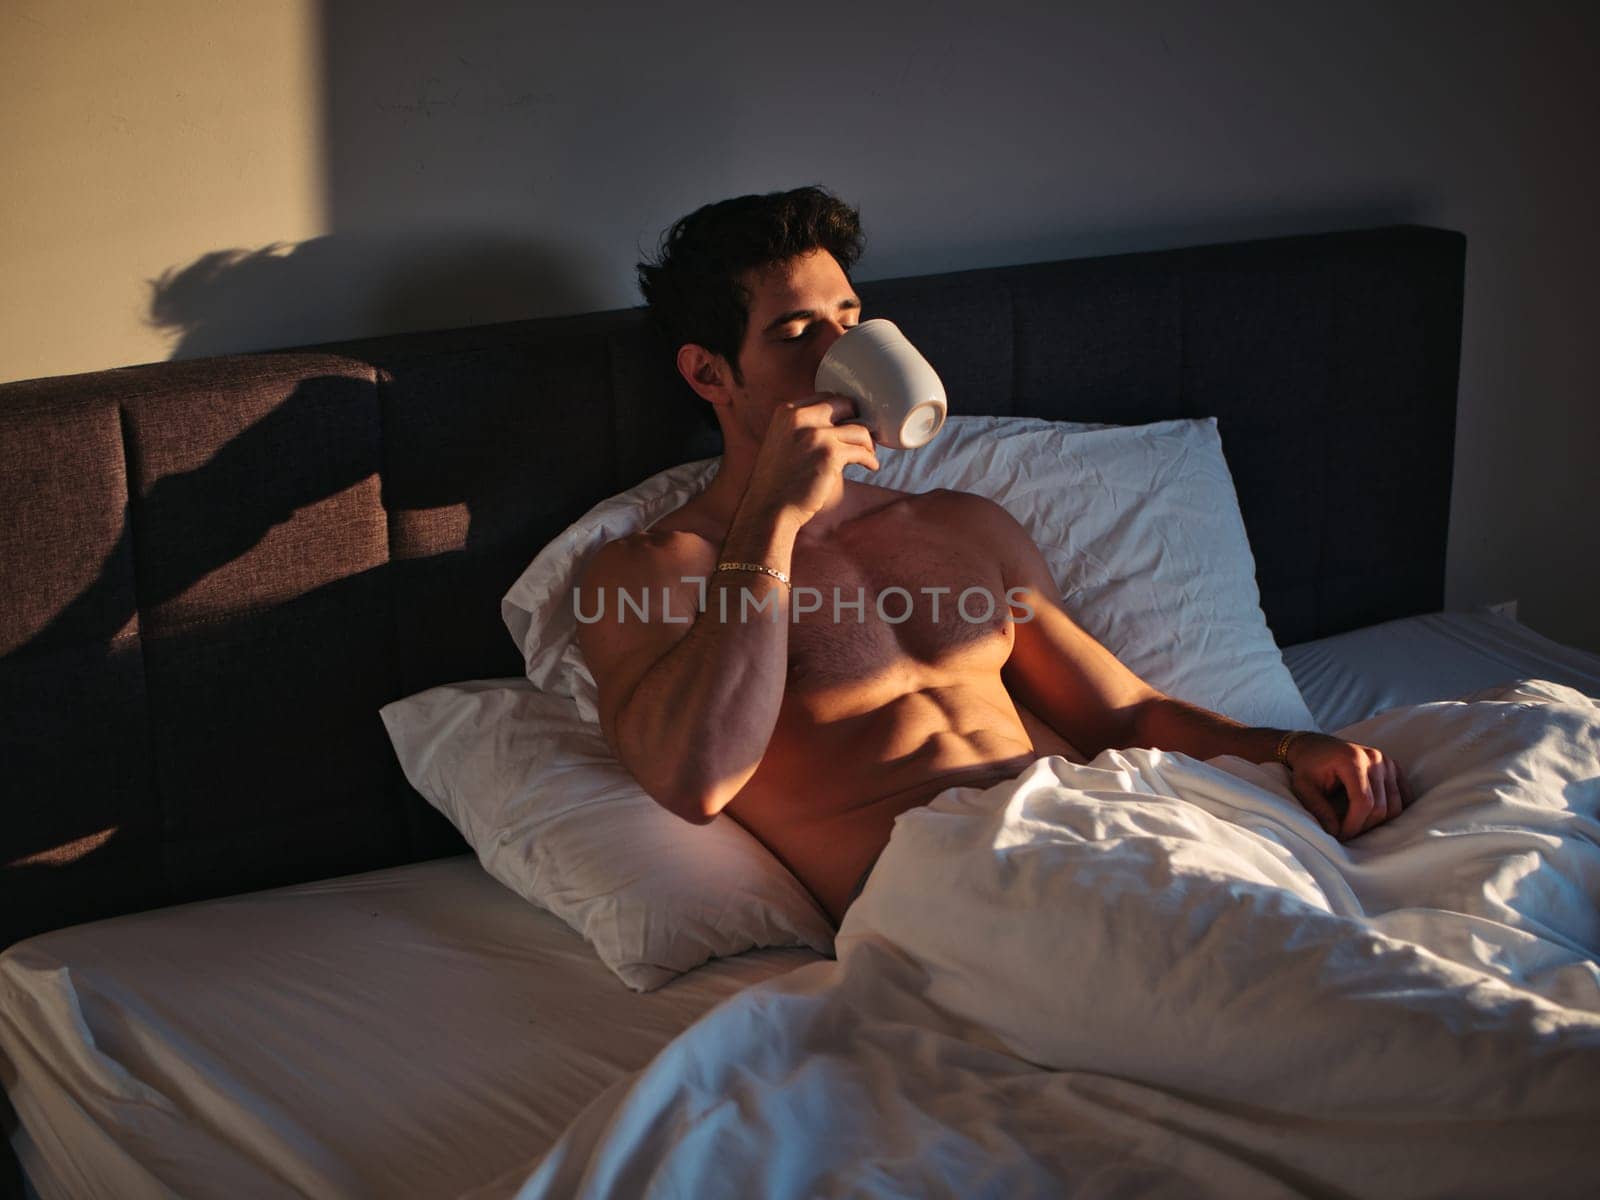 A shirtless man laying in bed with a mug, drinking coffee or tea from the cup